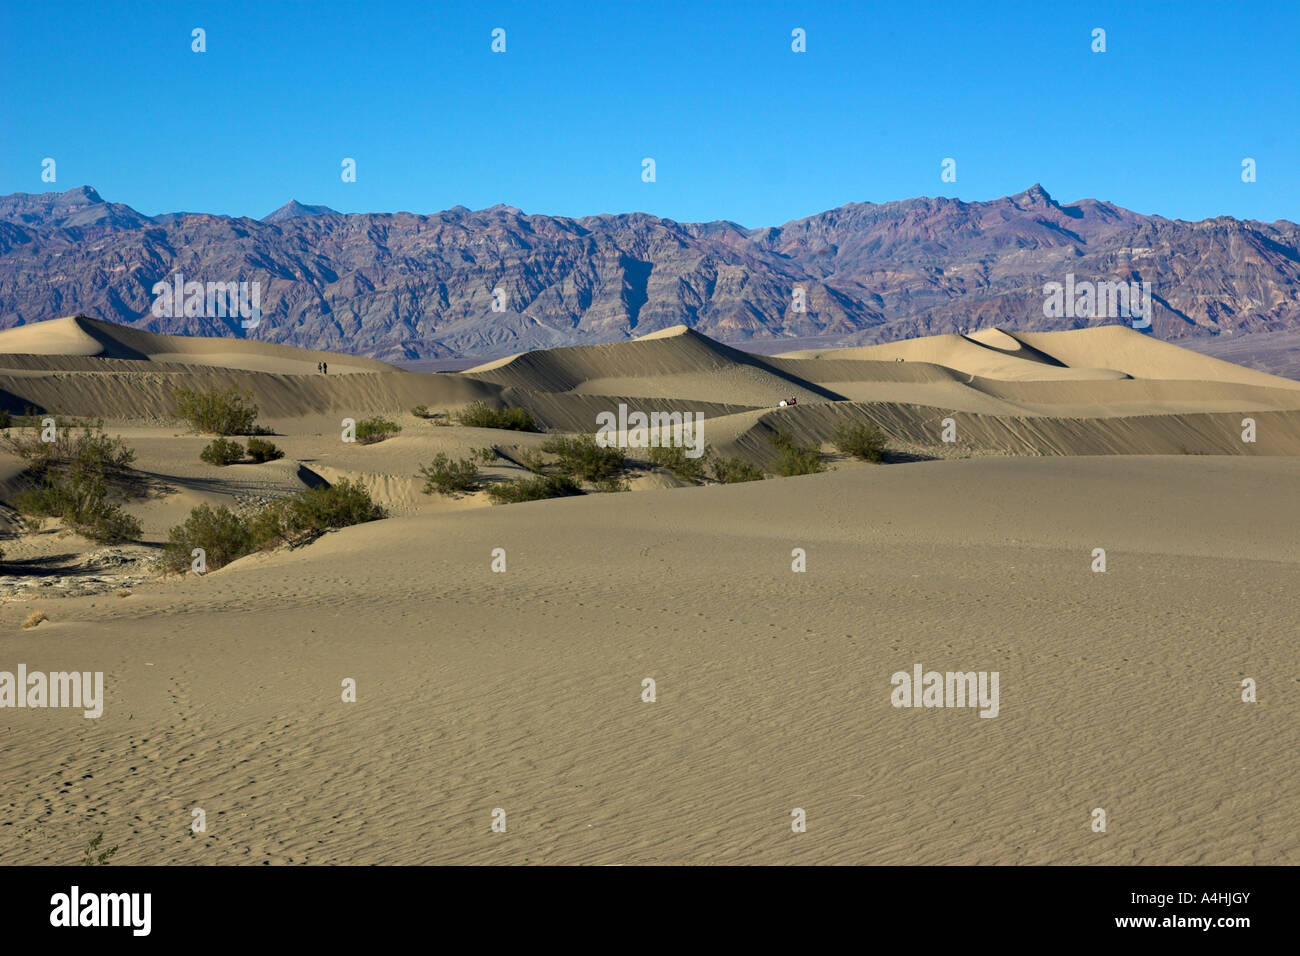 Star wars series largest dune called star dune hi-res stock photography ...